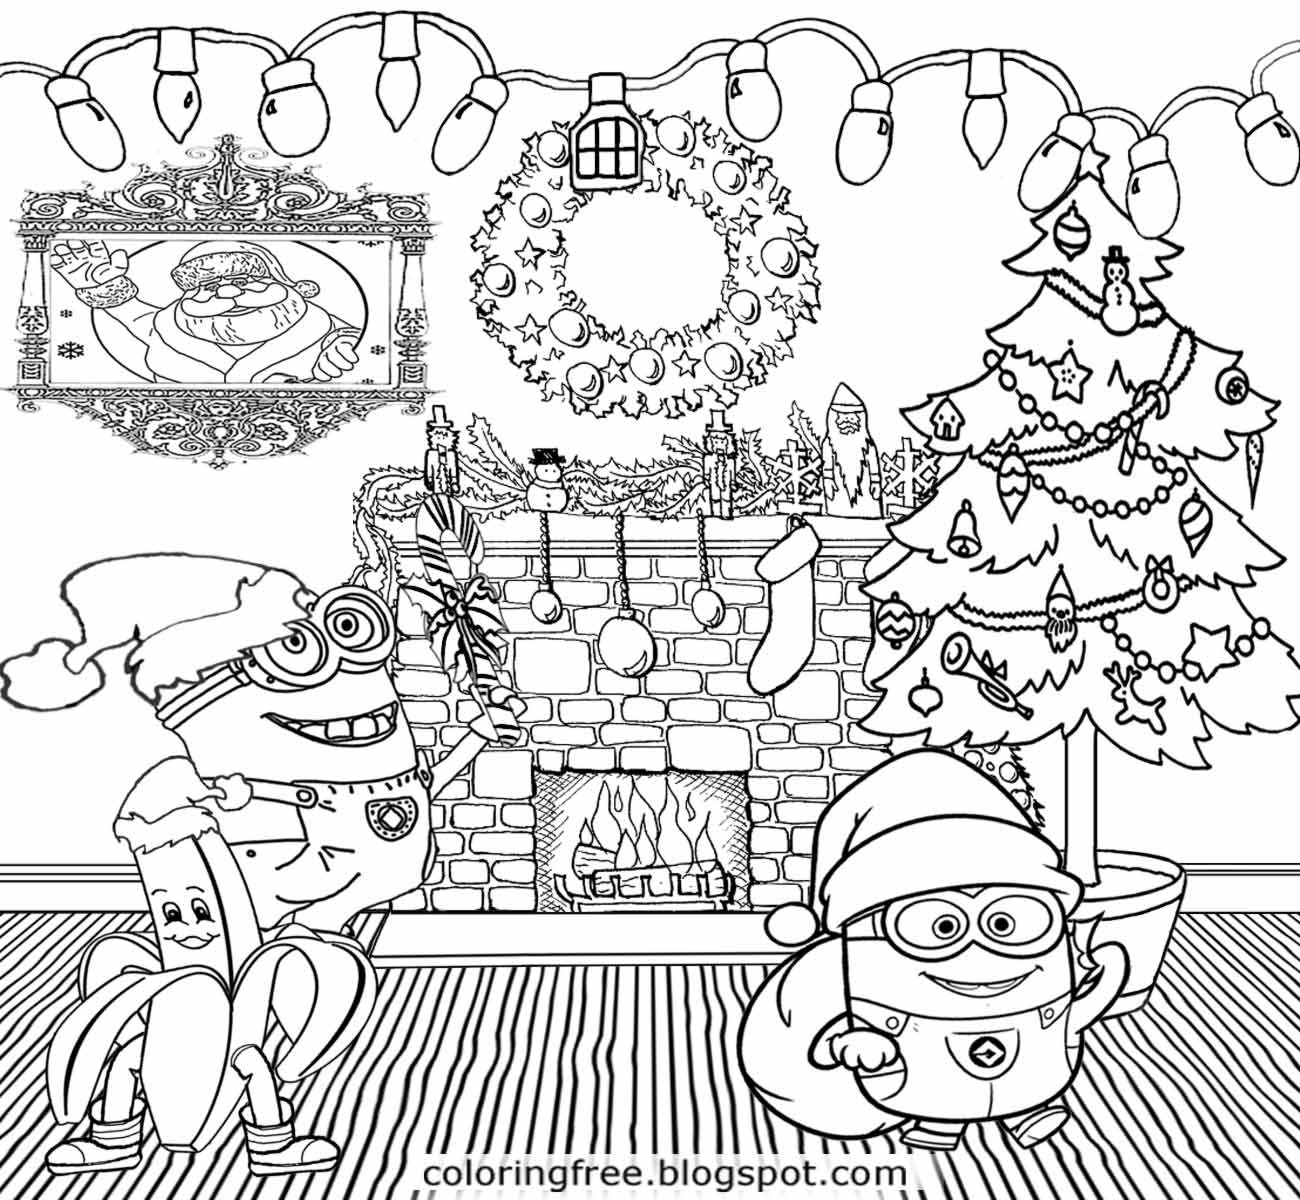 Cool Coloring Pages For Older Kids
 Free Coloring Pages Printable To Color Kids